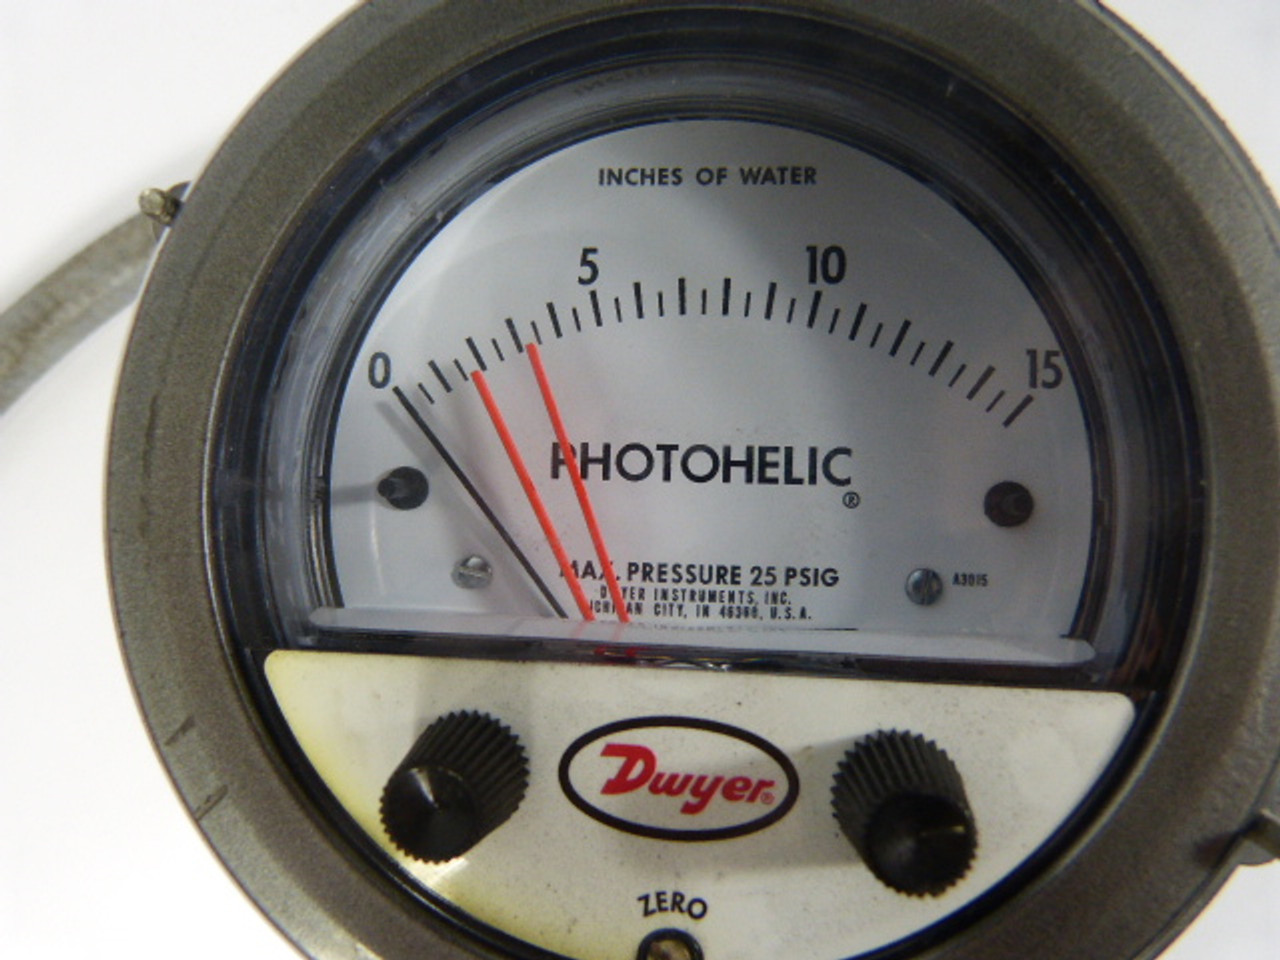 Dwyer A-3000 Photohelic Pressure Gauge 10Amp 120VAC 0-15 Inch Water Depth USED